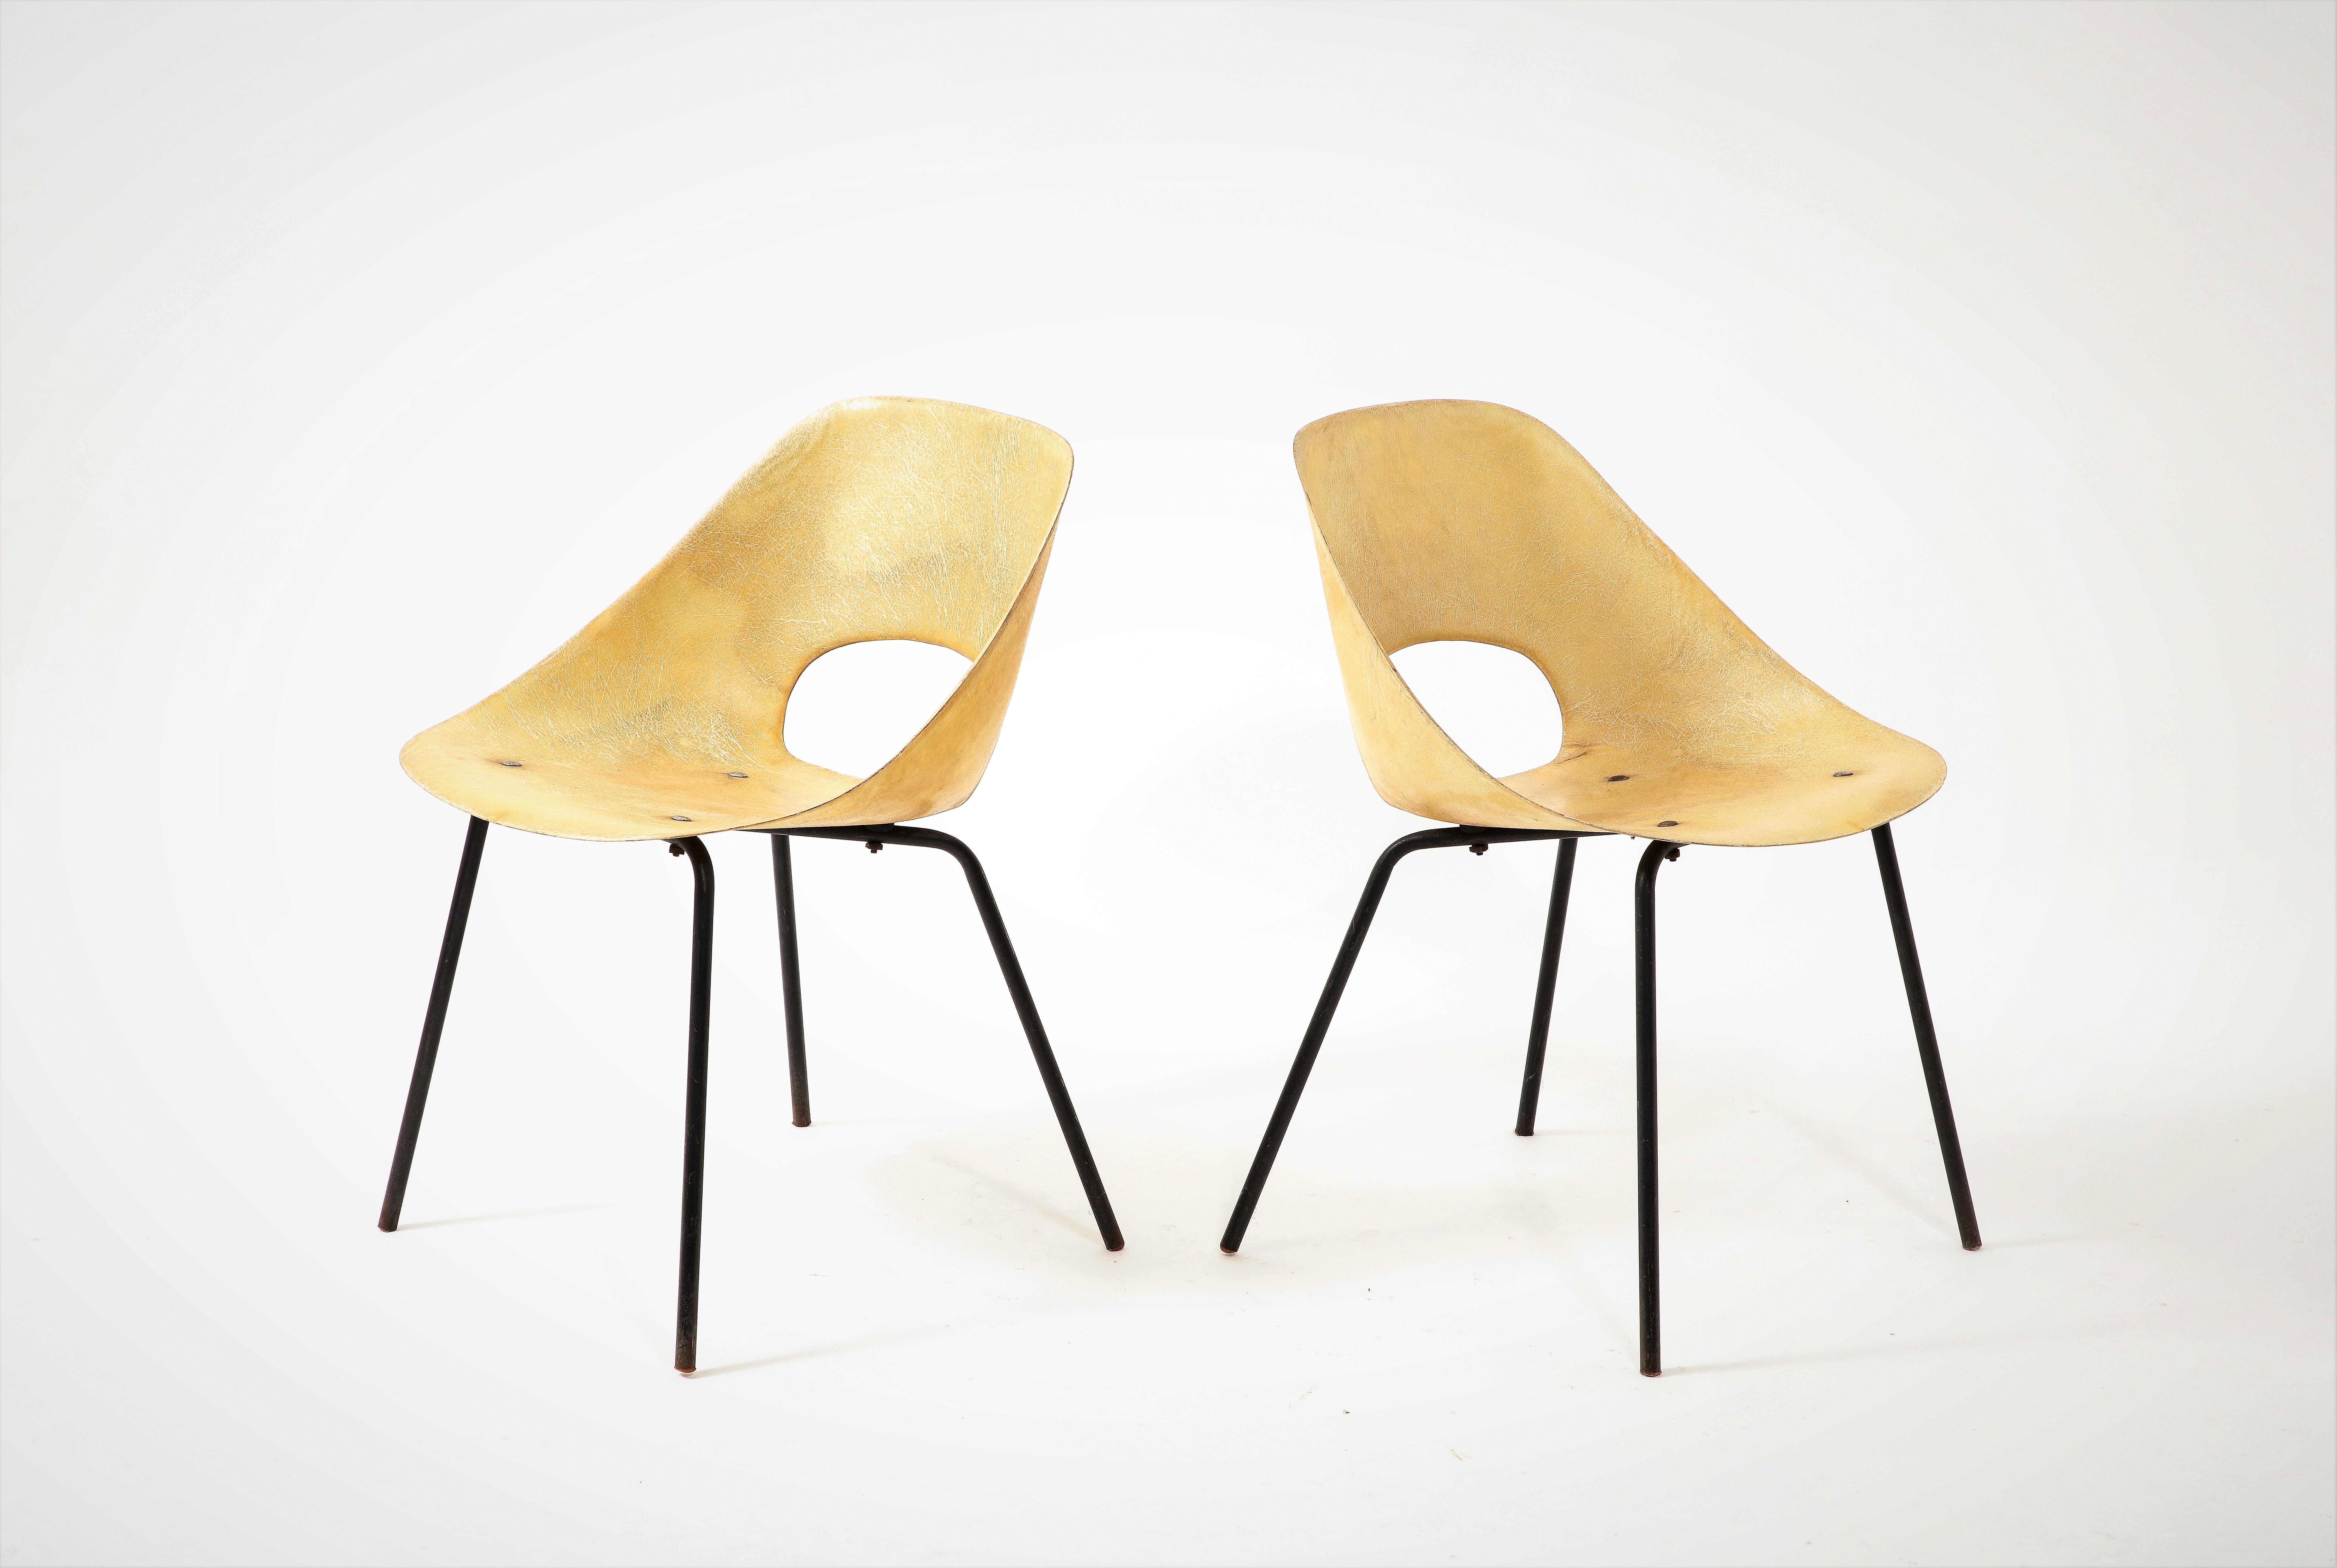 Mid-20th Century Pair of Pierre Guariche Yellow Fiberglass Side Chairs by Steiner - France 1950's For Sale